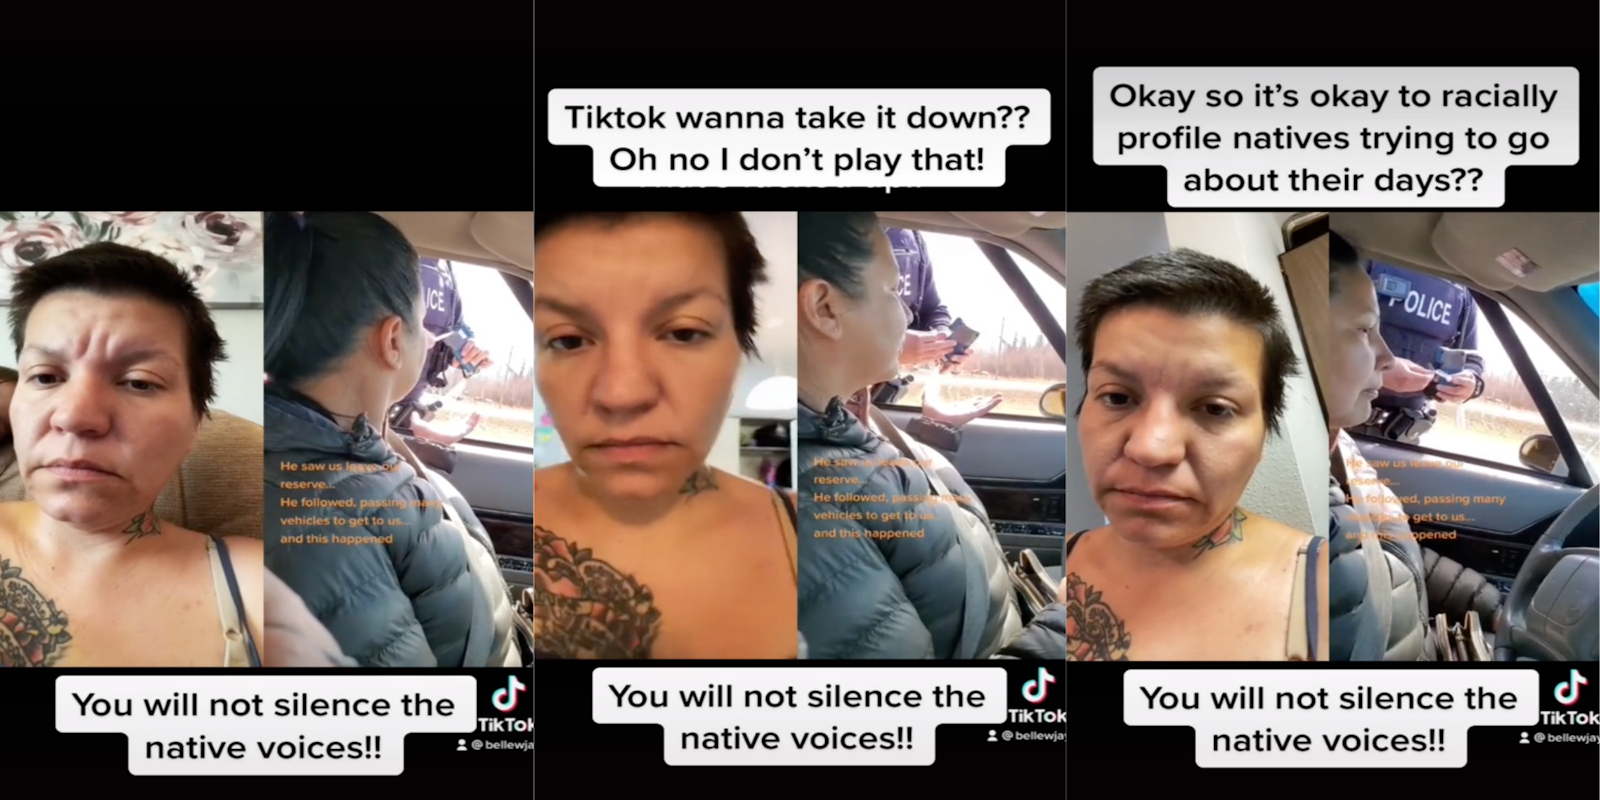 Three panel screenshot from a TikTok showing a police officer pulling over a First Nation person for a breathalyzer test